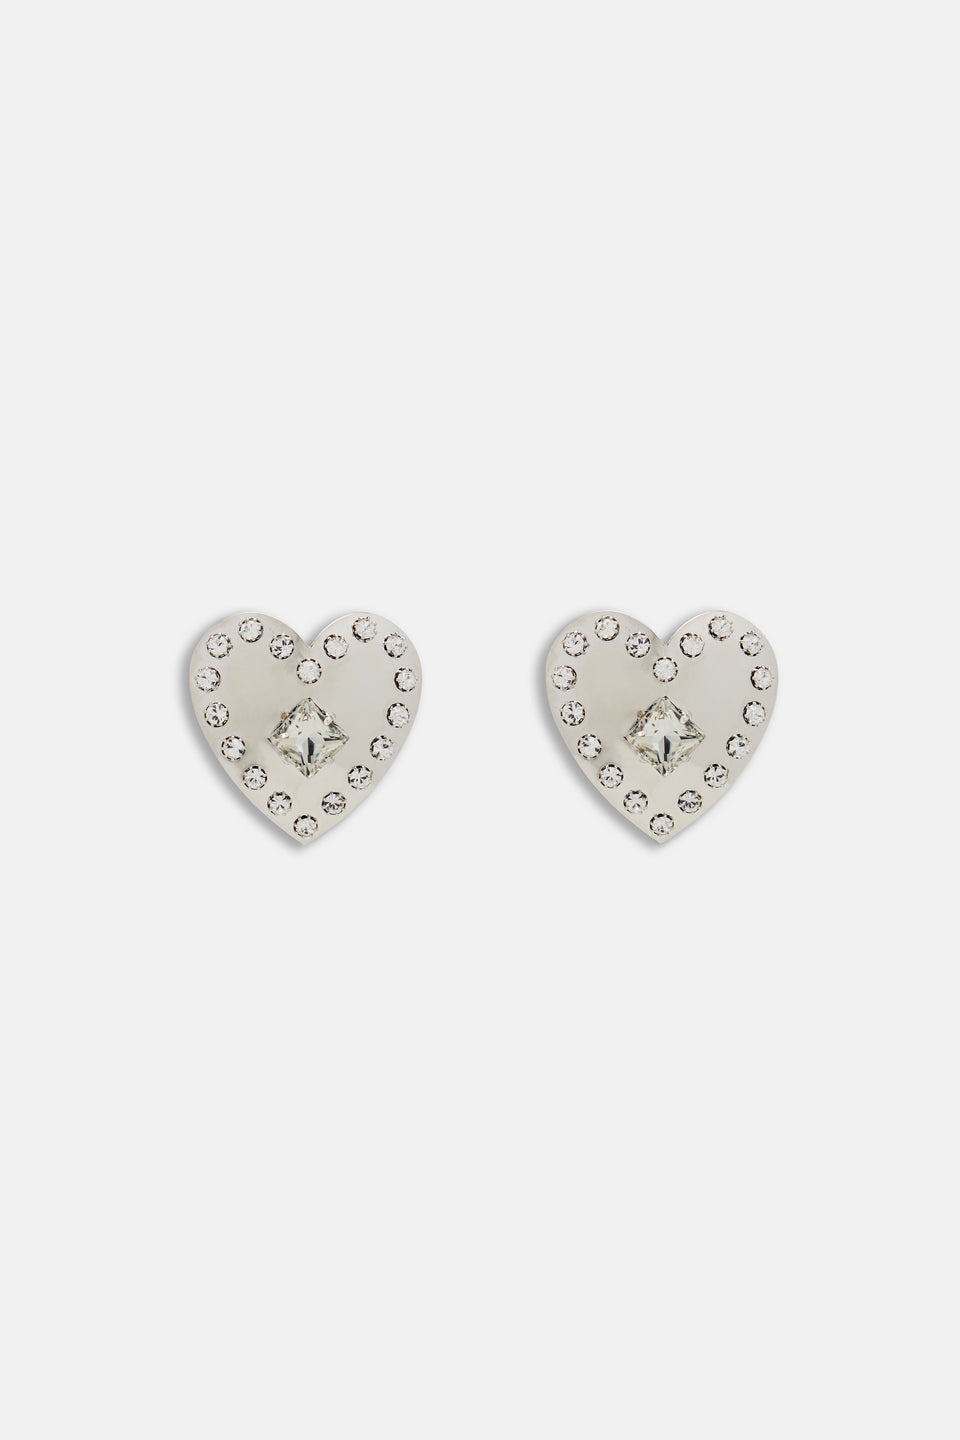 METAL HEART EARRINGS WITH CRYSTALS - 1